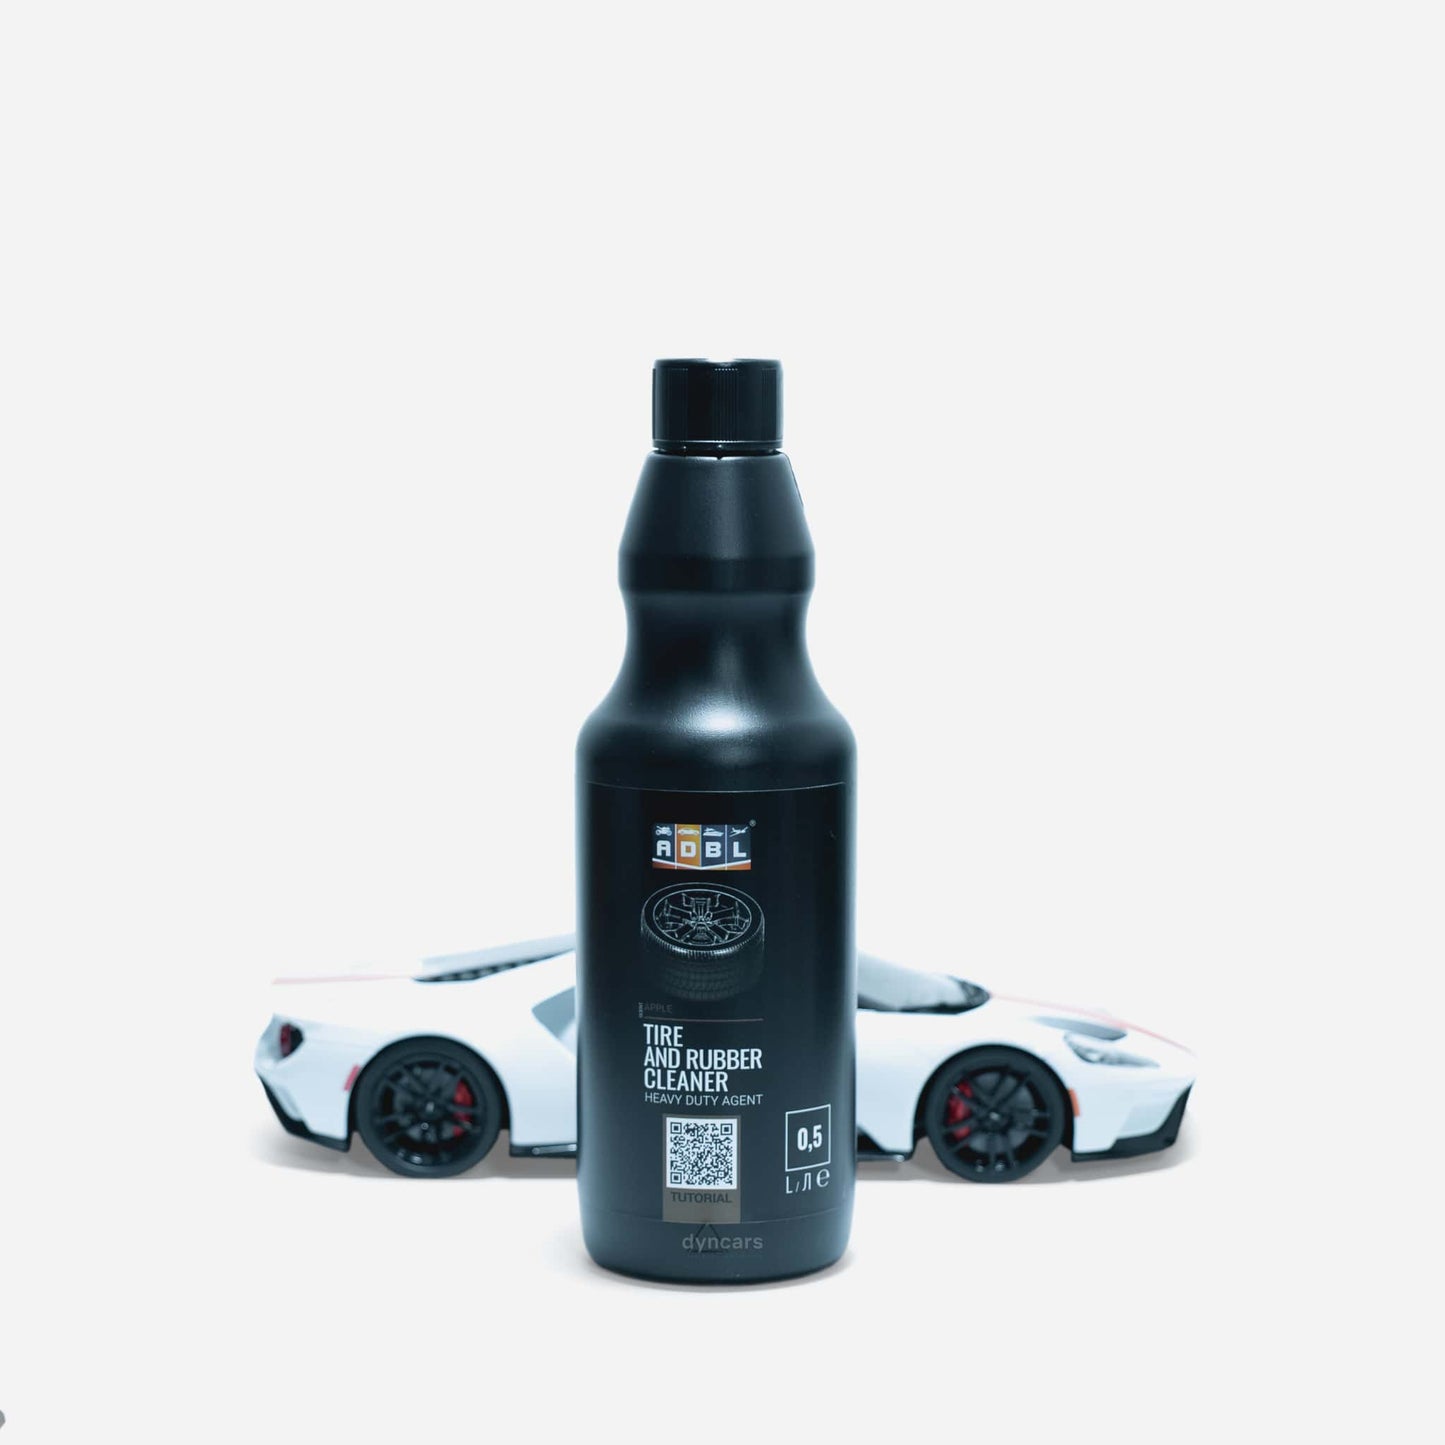 ADBL Tire and Rubber Cleaner